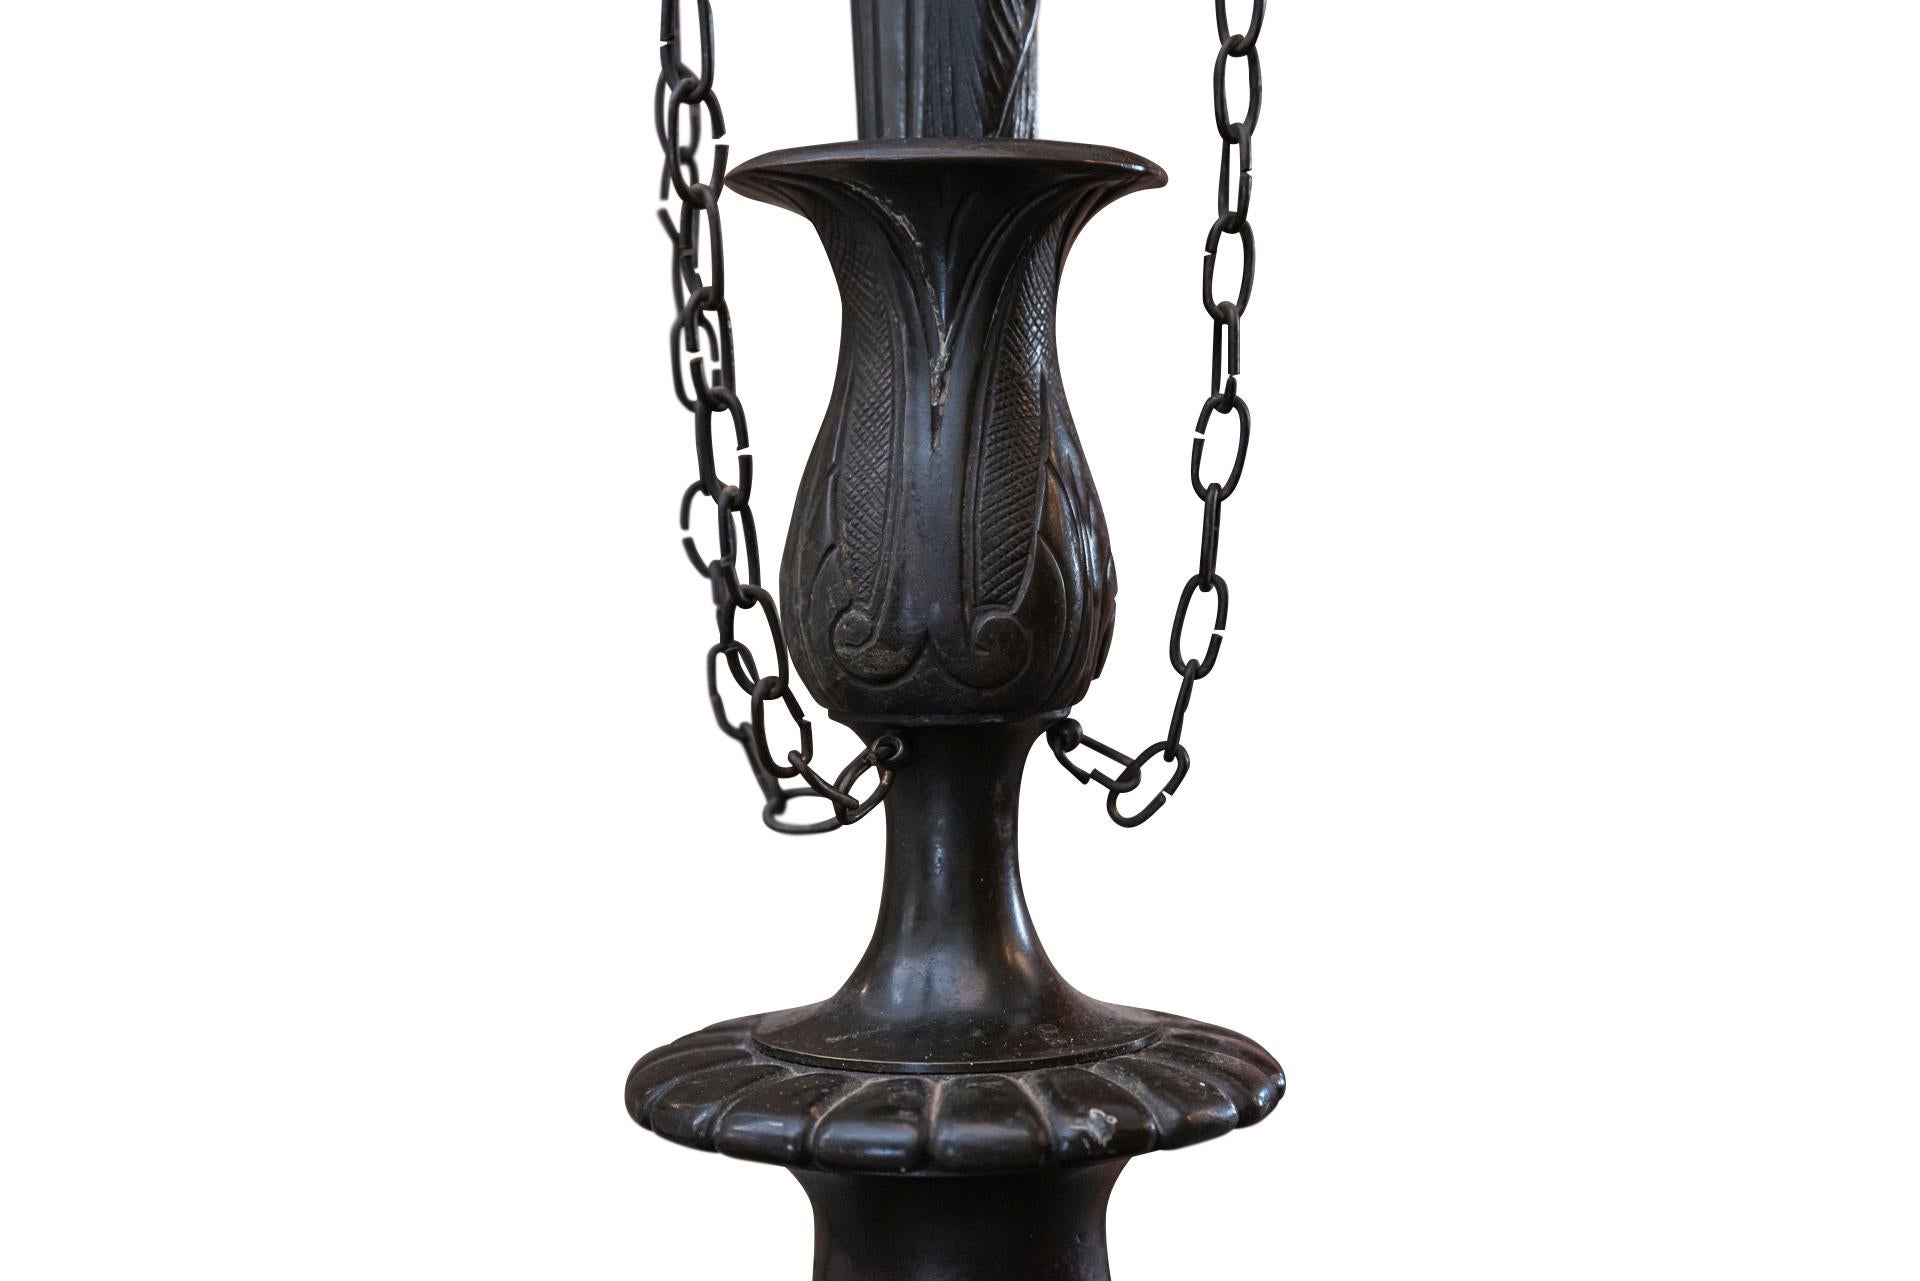 Bronze Neoclassical Style Floor Lamp in the Style of the Antique, circa 1920, France